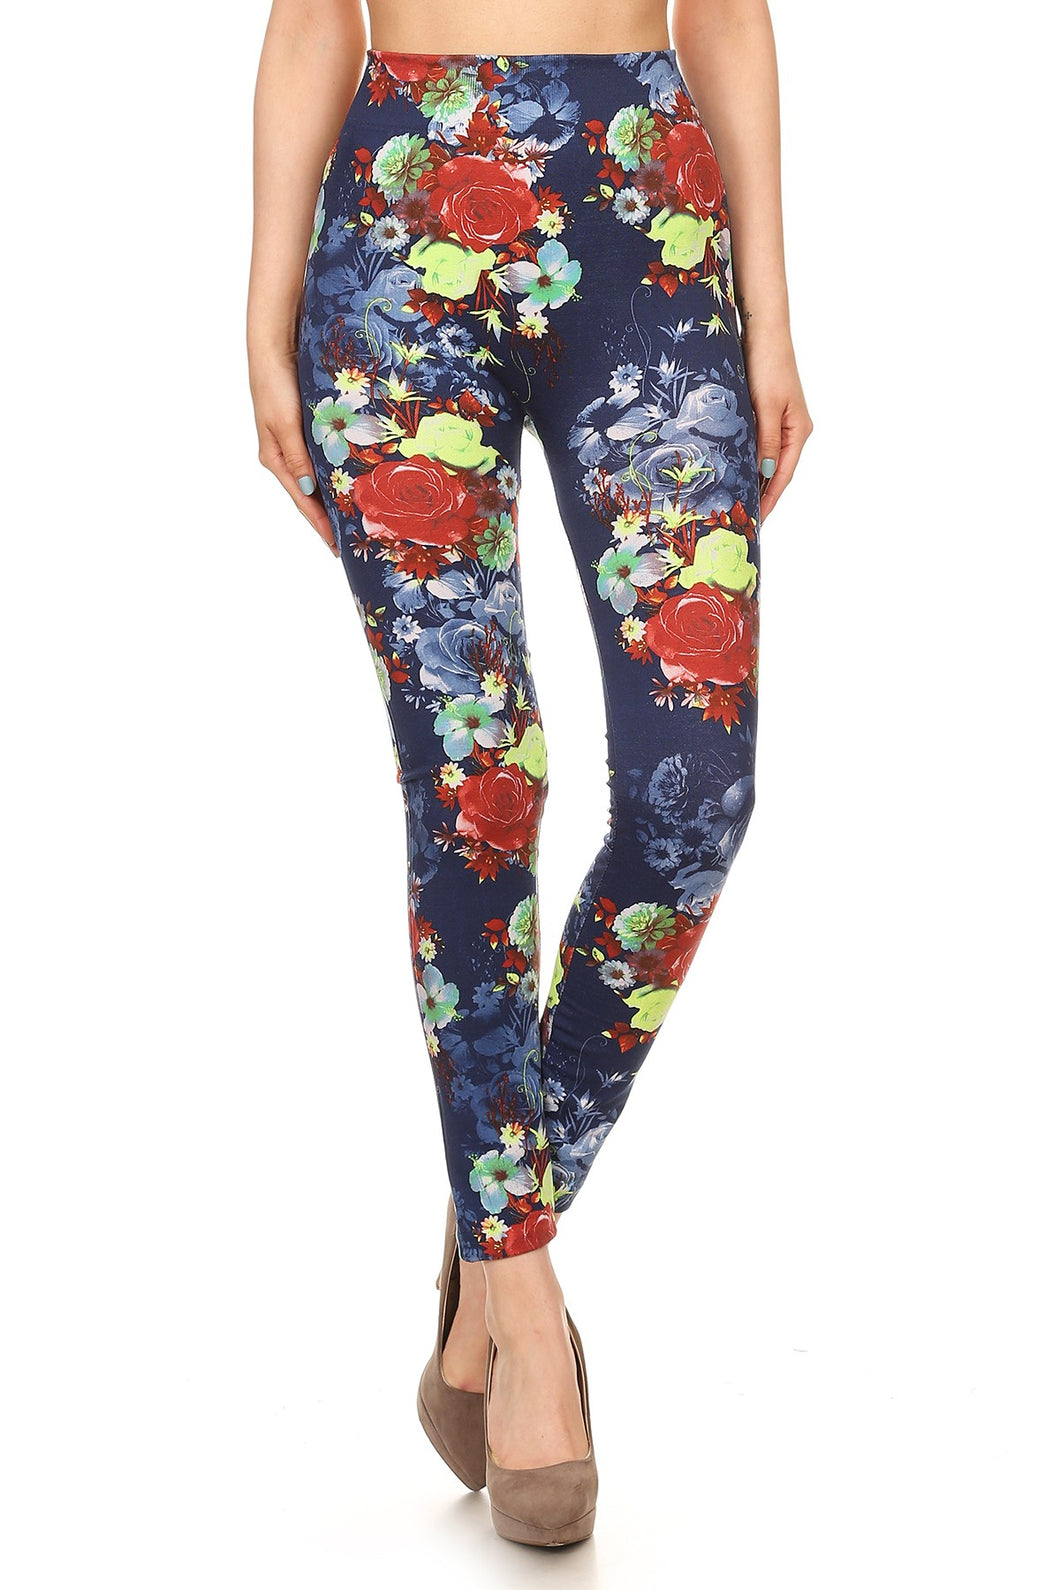 Floral printed, high waisted leggings